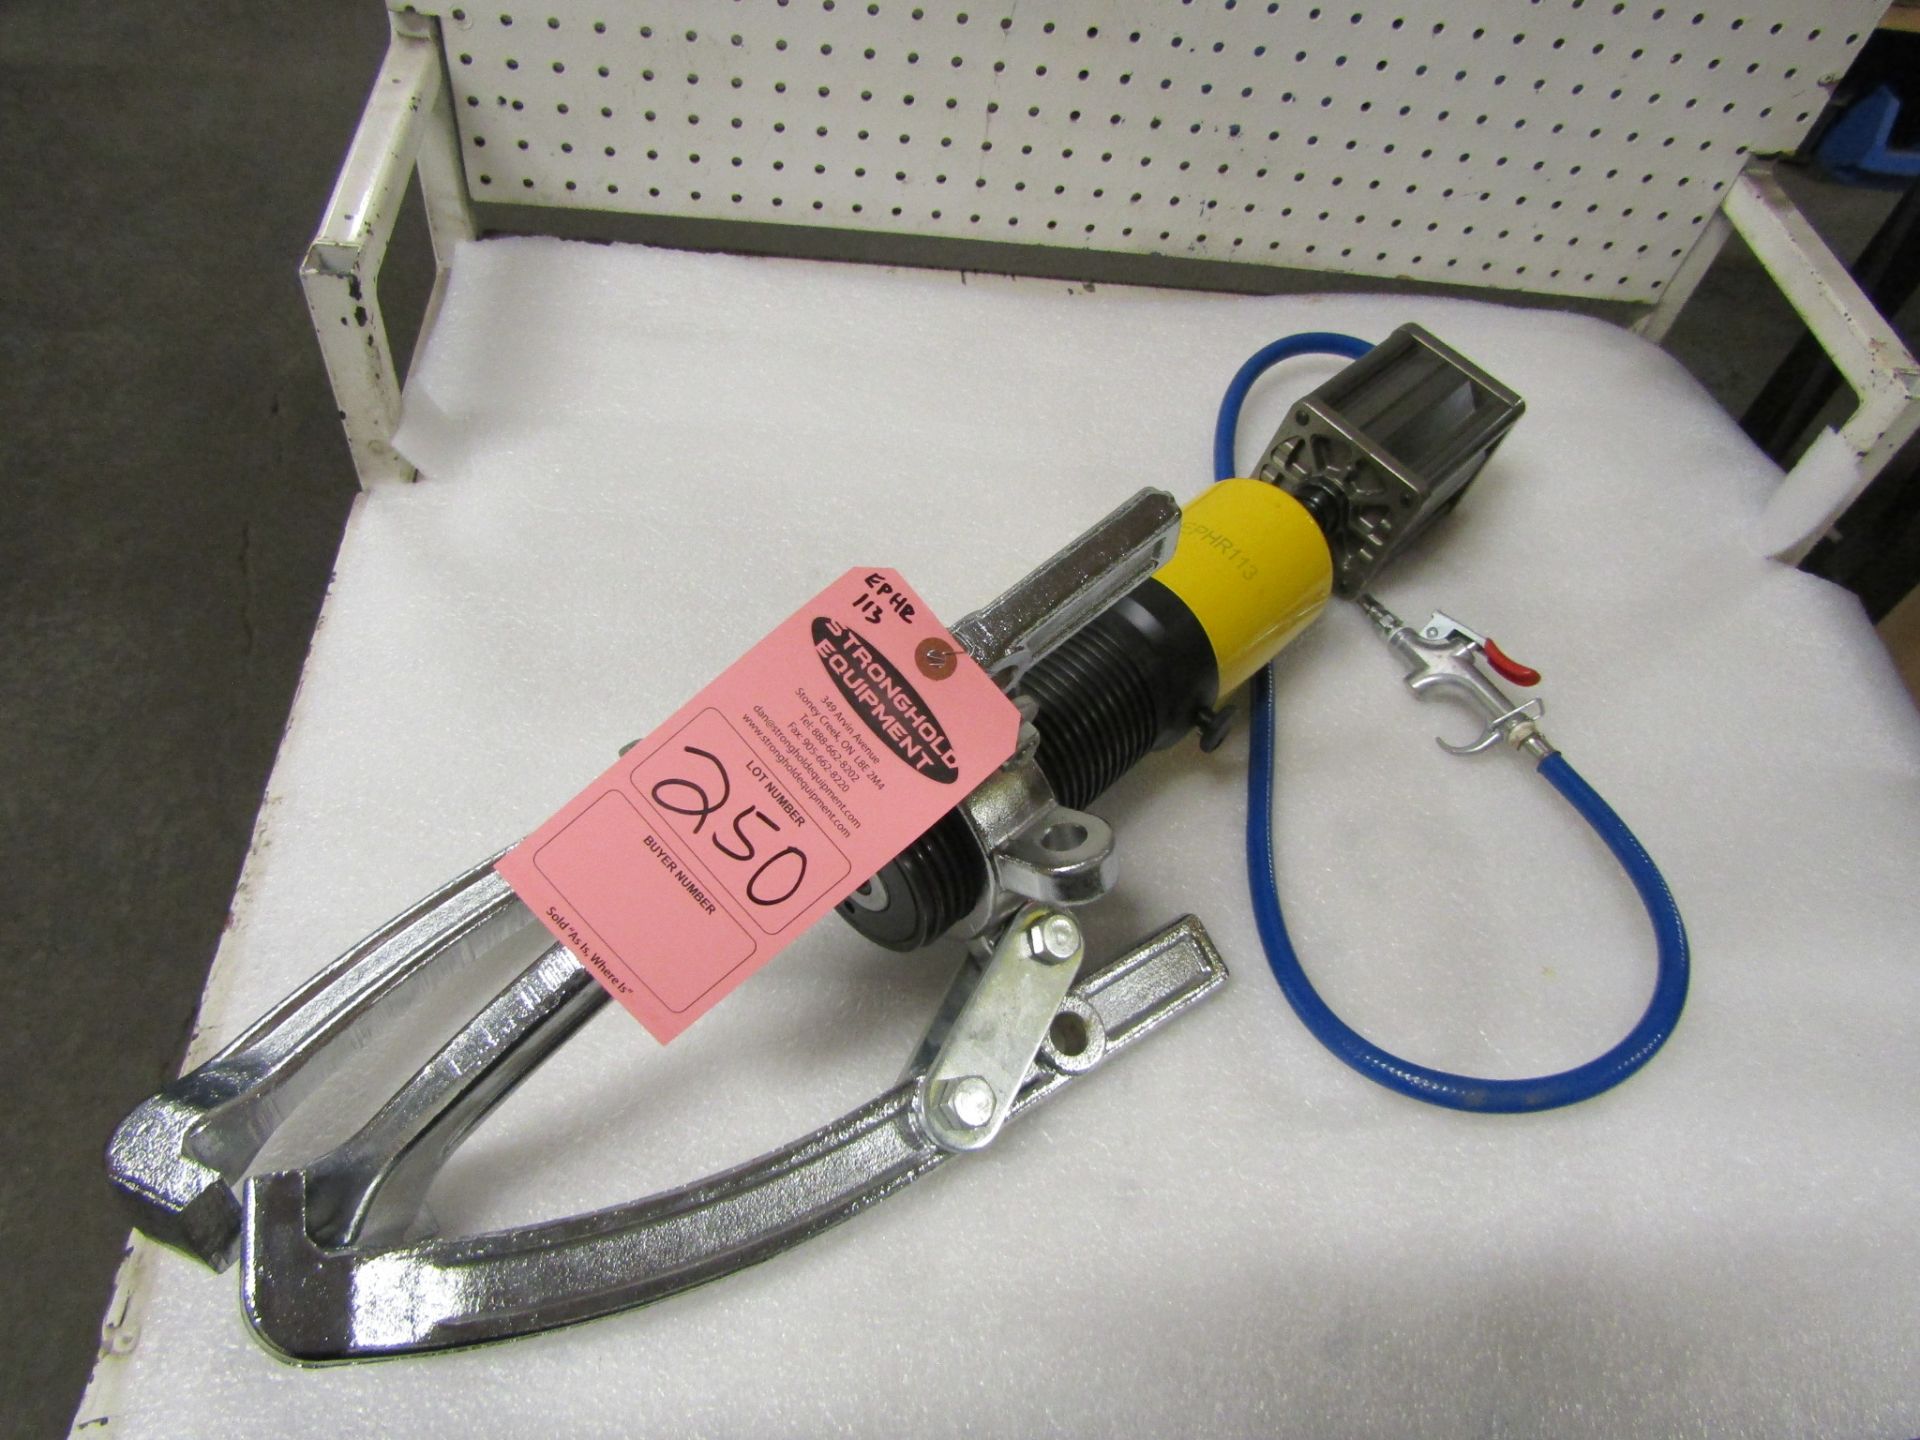 model EPHR113 Pneumatic / Air over Hydraulic Bearing Puller with 20 ton capacity MINT